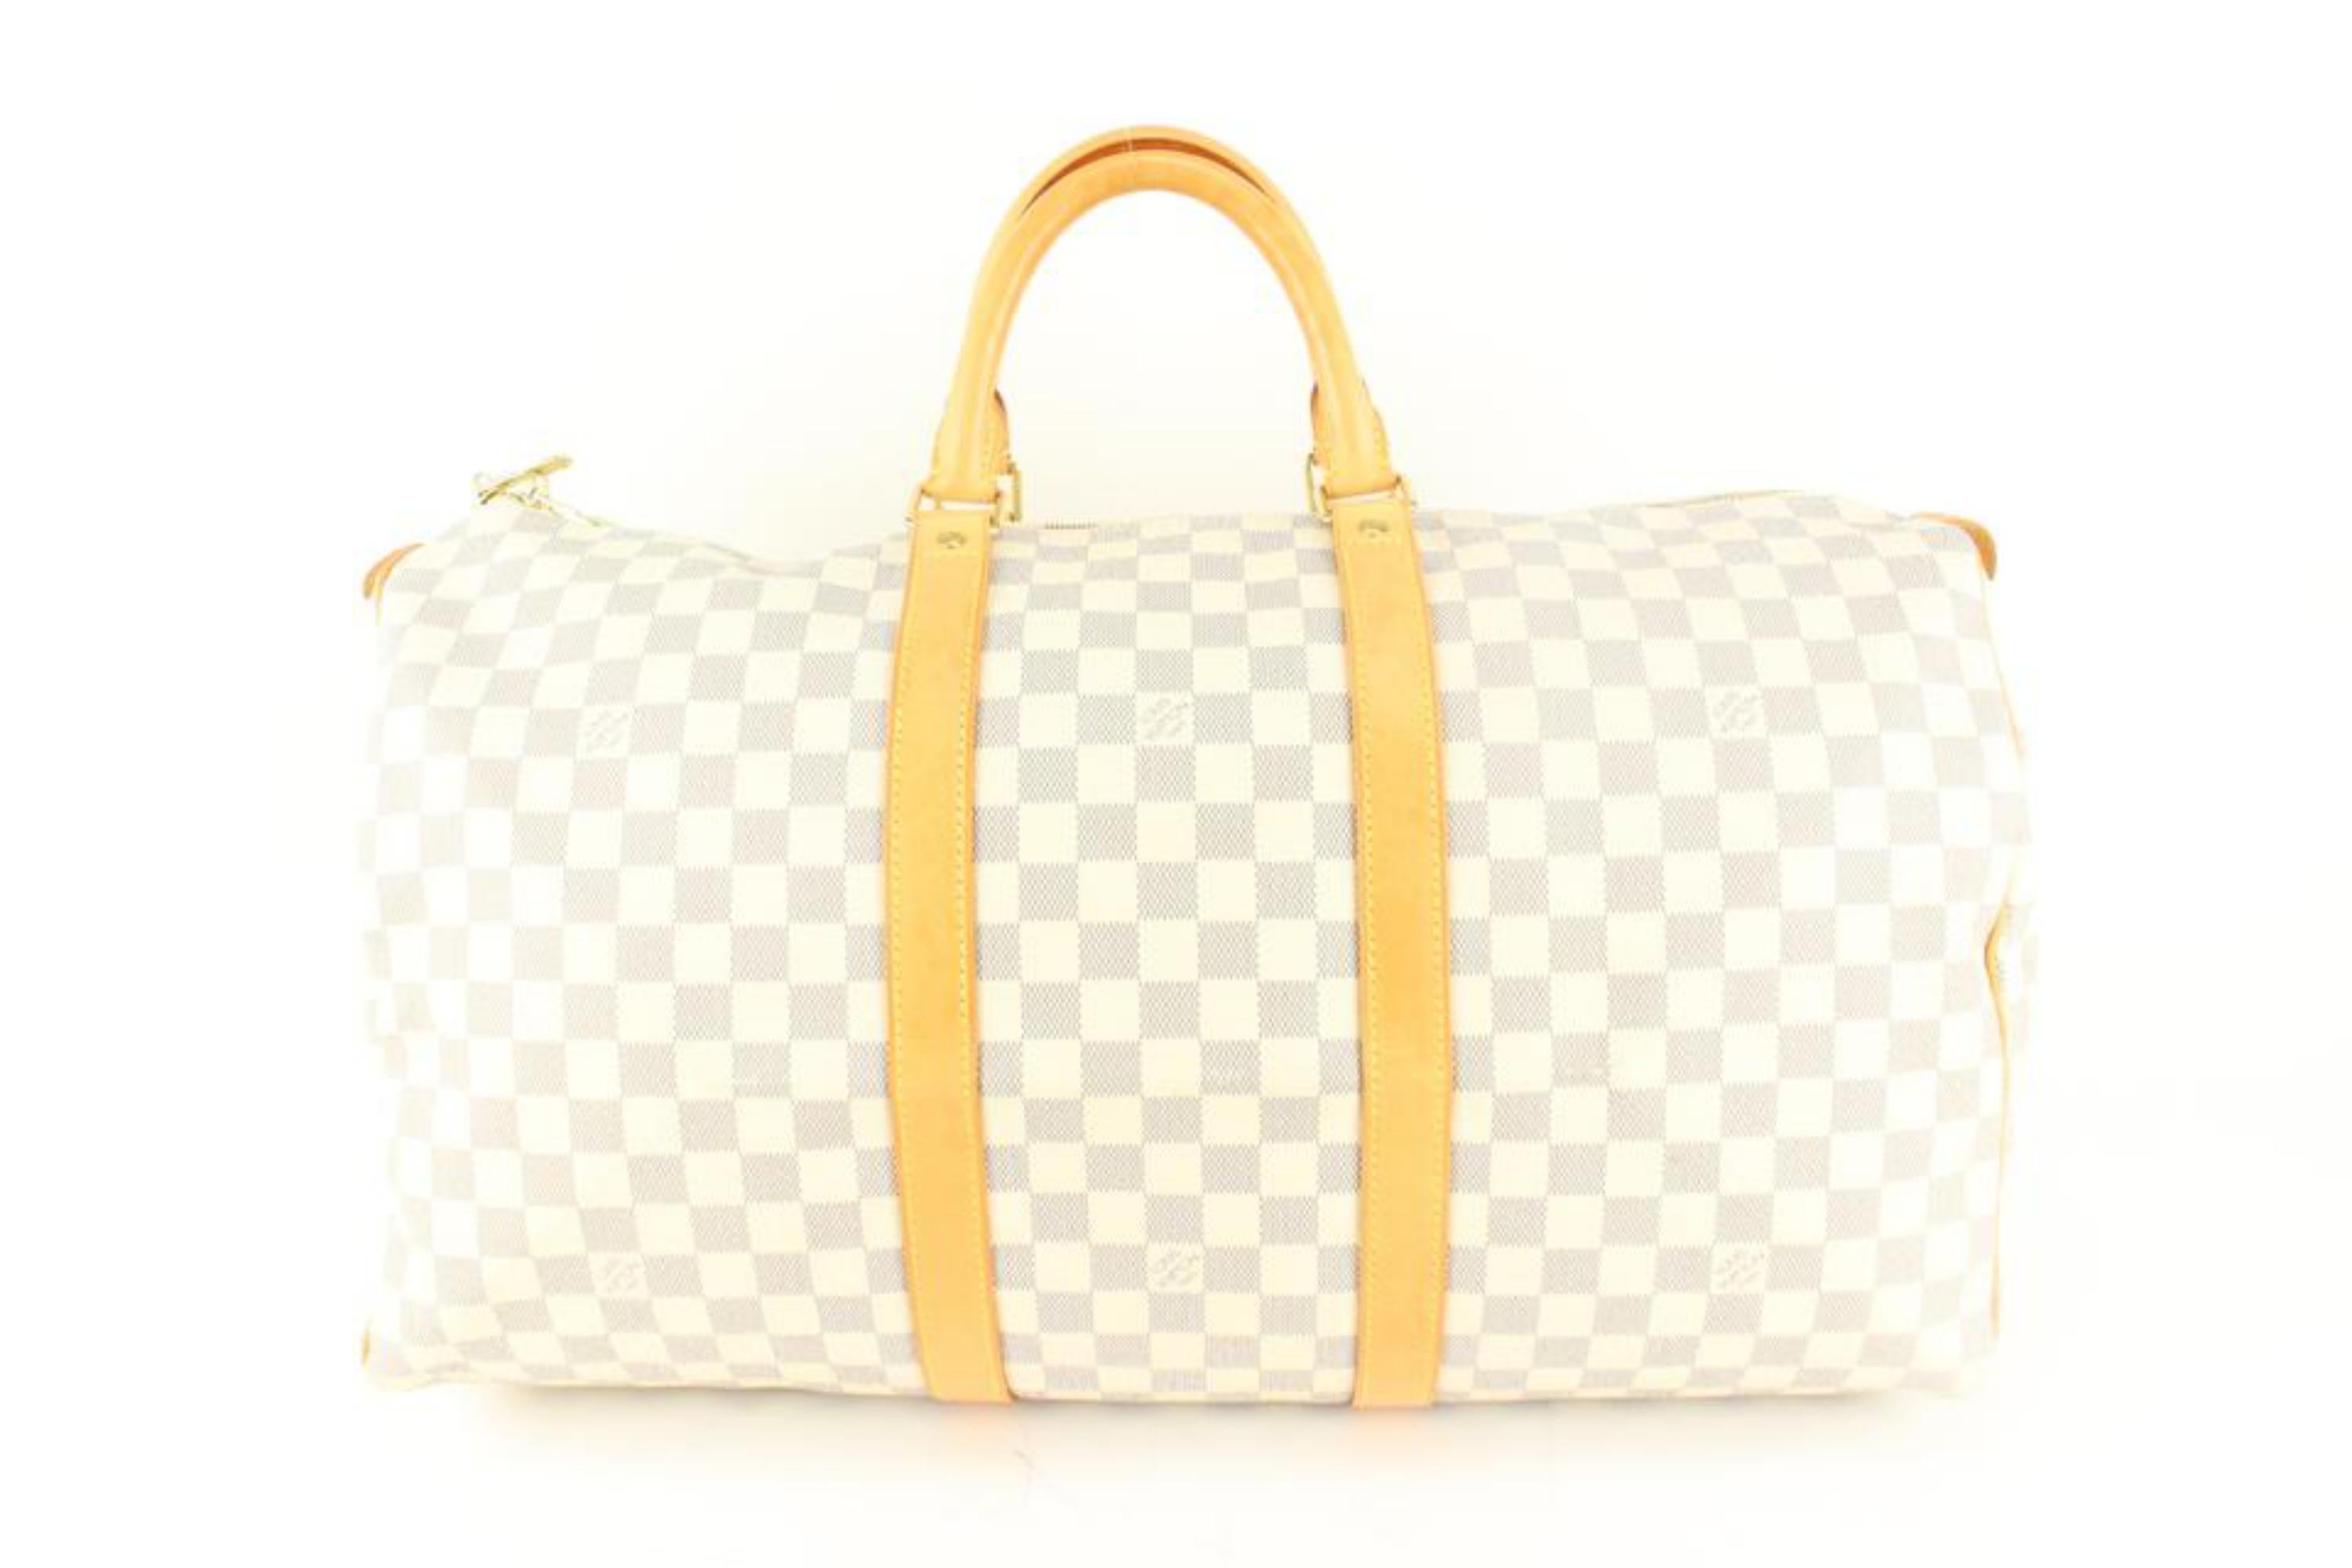 Louis Vuitton Damier Azur Keepall 50 Duffle Bag 52lk62s In Good Condition For Sale In Dix hills, NY